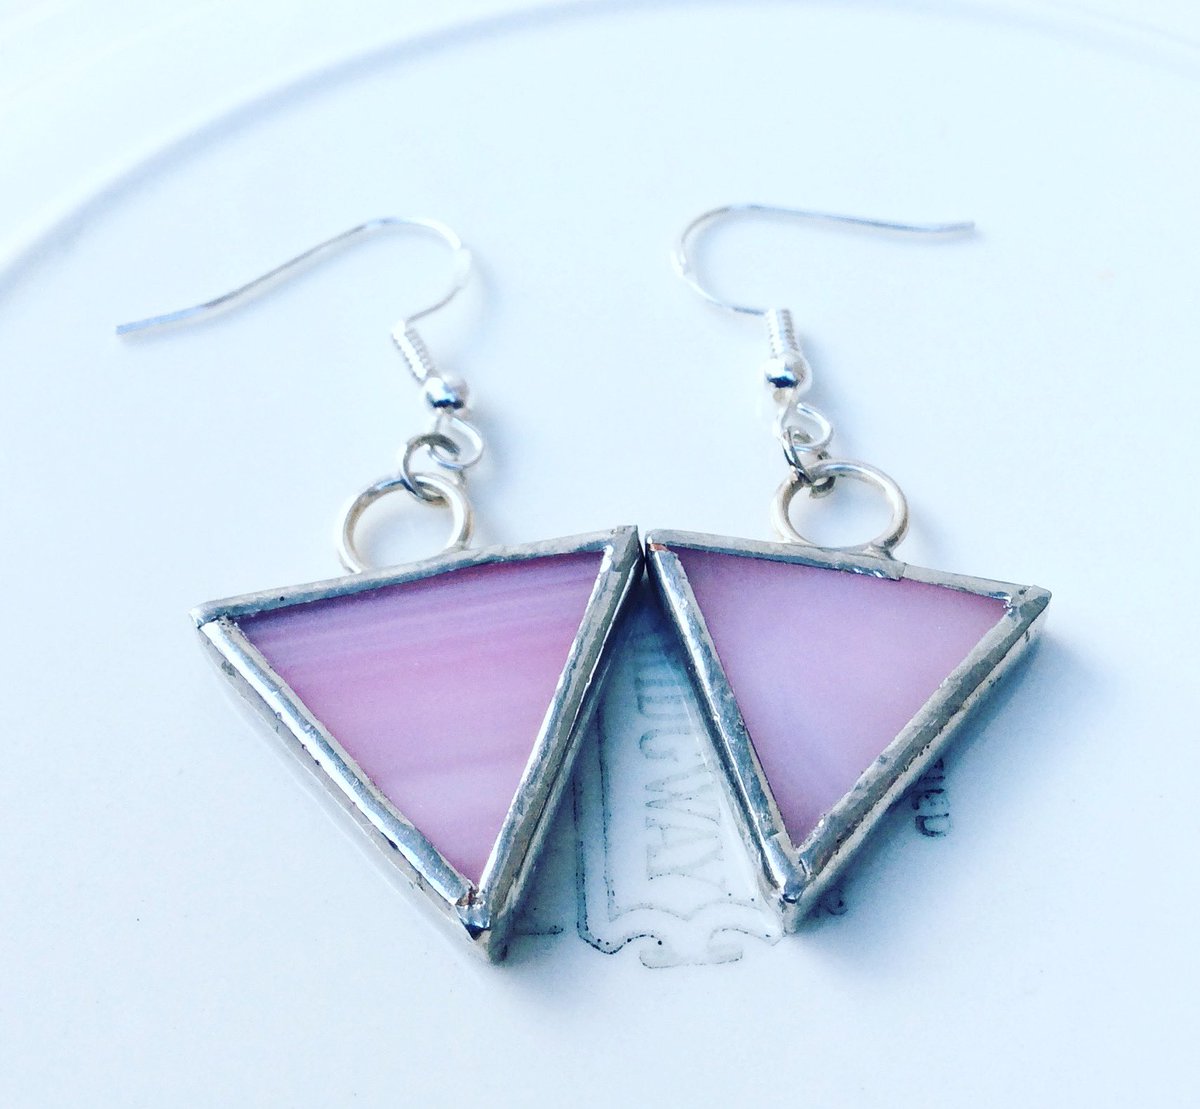 Pink Triangle Glass earrings pride jewelry sterling silver Valentines Crow Vanity Canada, free shipping sale
CA$69.00 #jewelrygifts #etsyjewelry #valentinesgift #lgbtpride #pinktriangle #blacktriangle #triangleearrings #glassearrings #jewelry